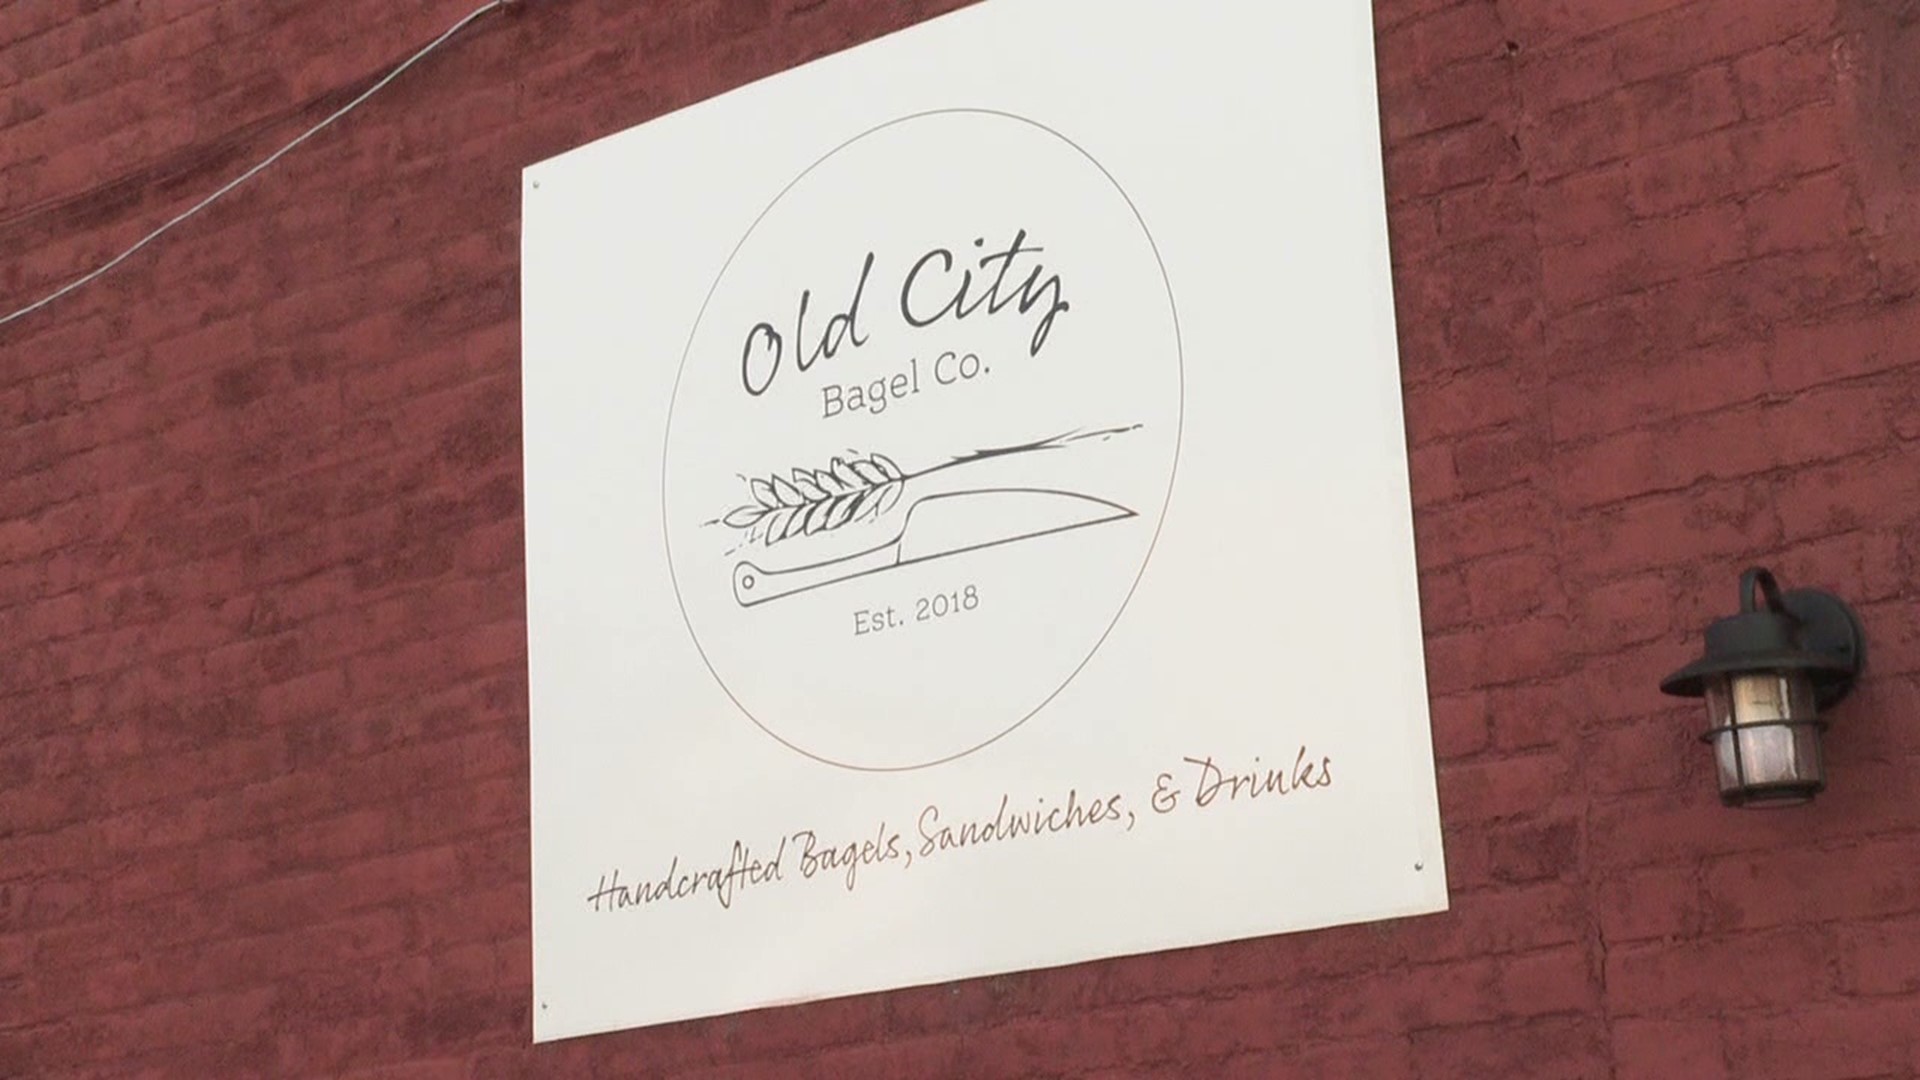 Despite the challenges of the pandemic and a lot of uncertainty, Old City Bagel Company is finally opening its doors.